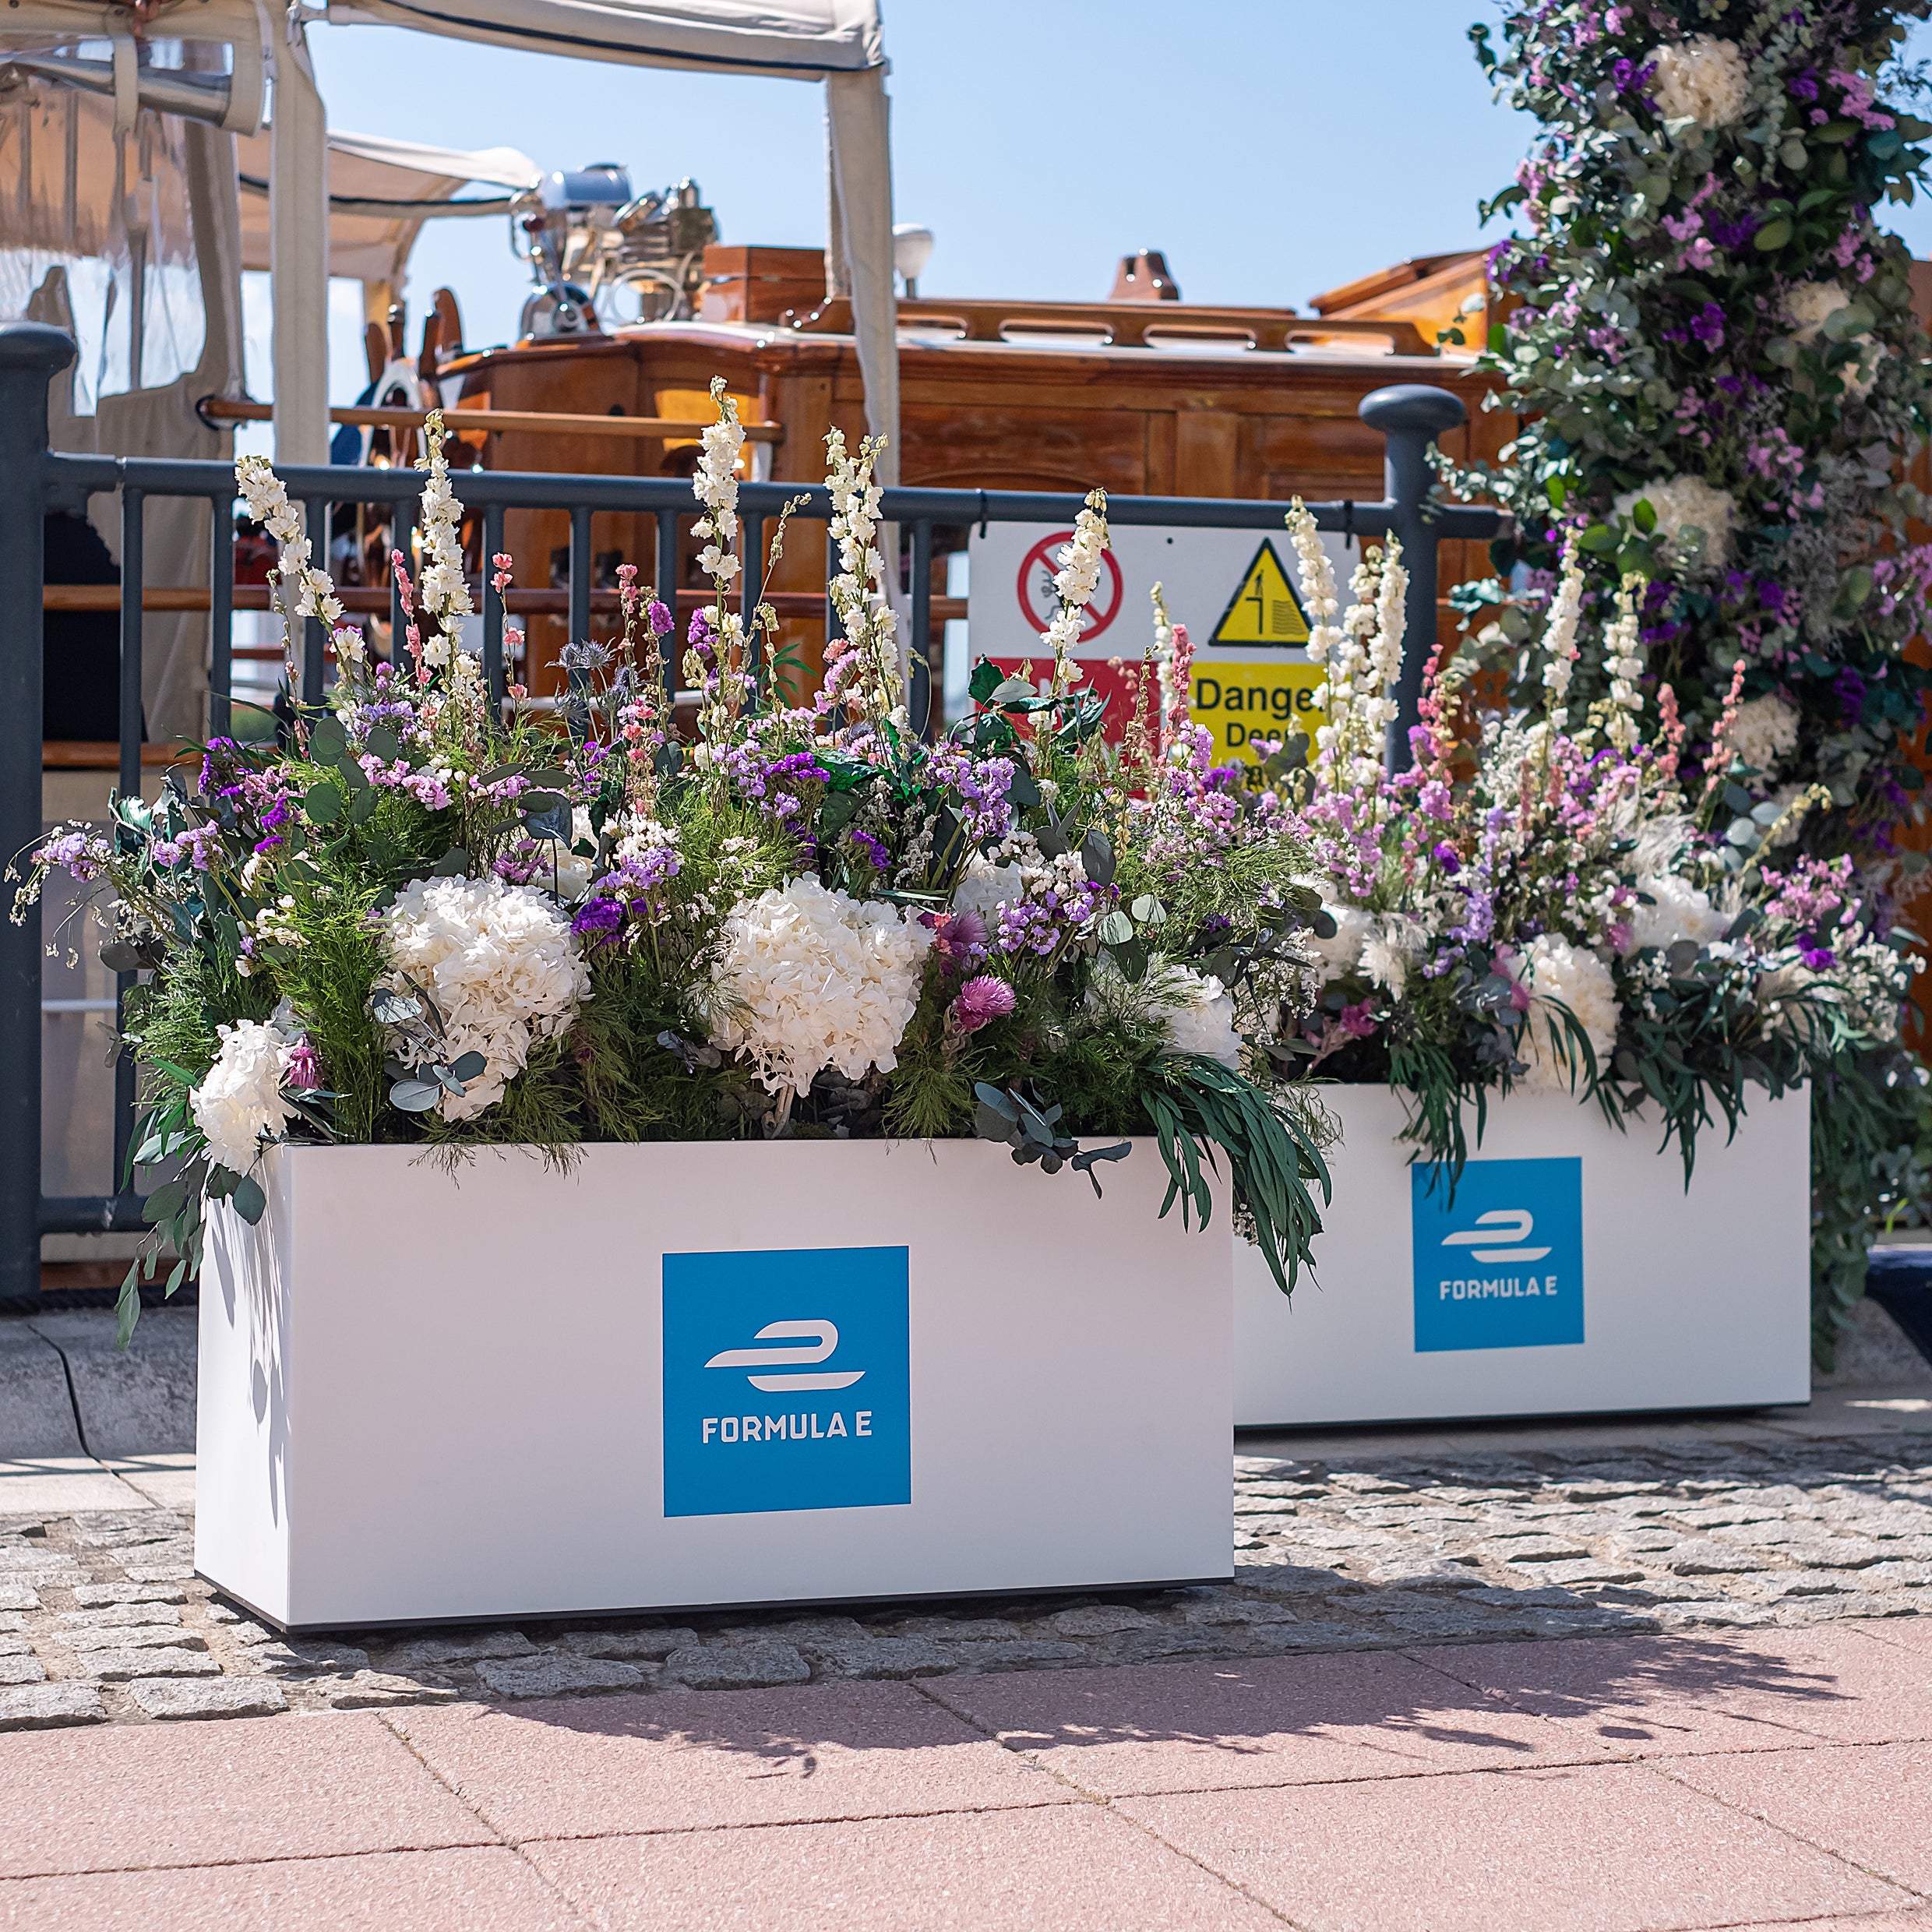 Bespoke planters created for the Formula E event at the excel Centre for their event - Amaranté London Event Florist